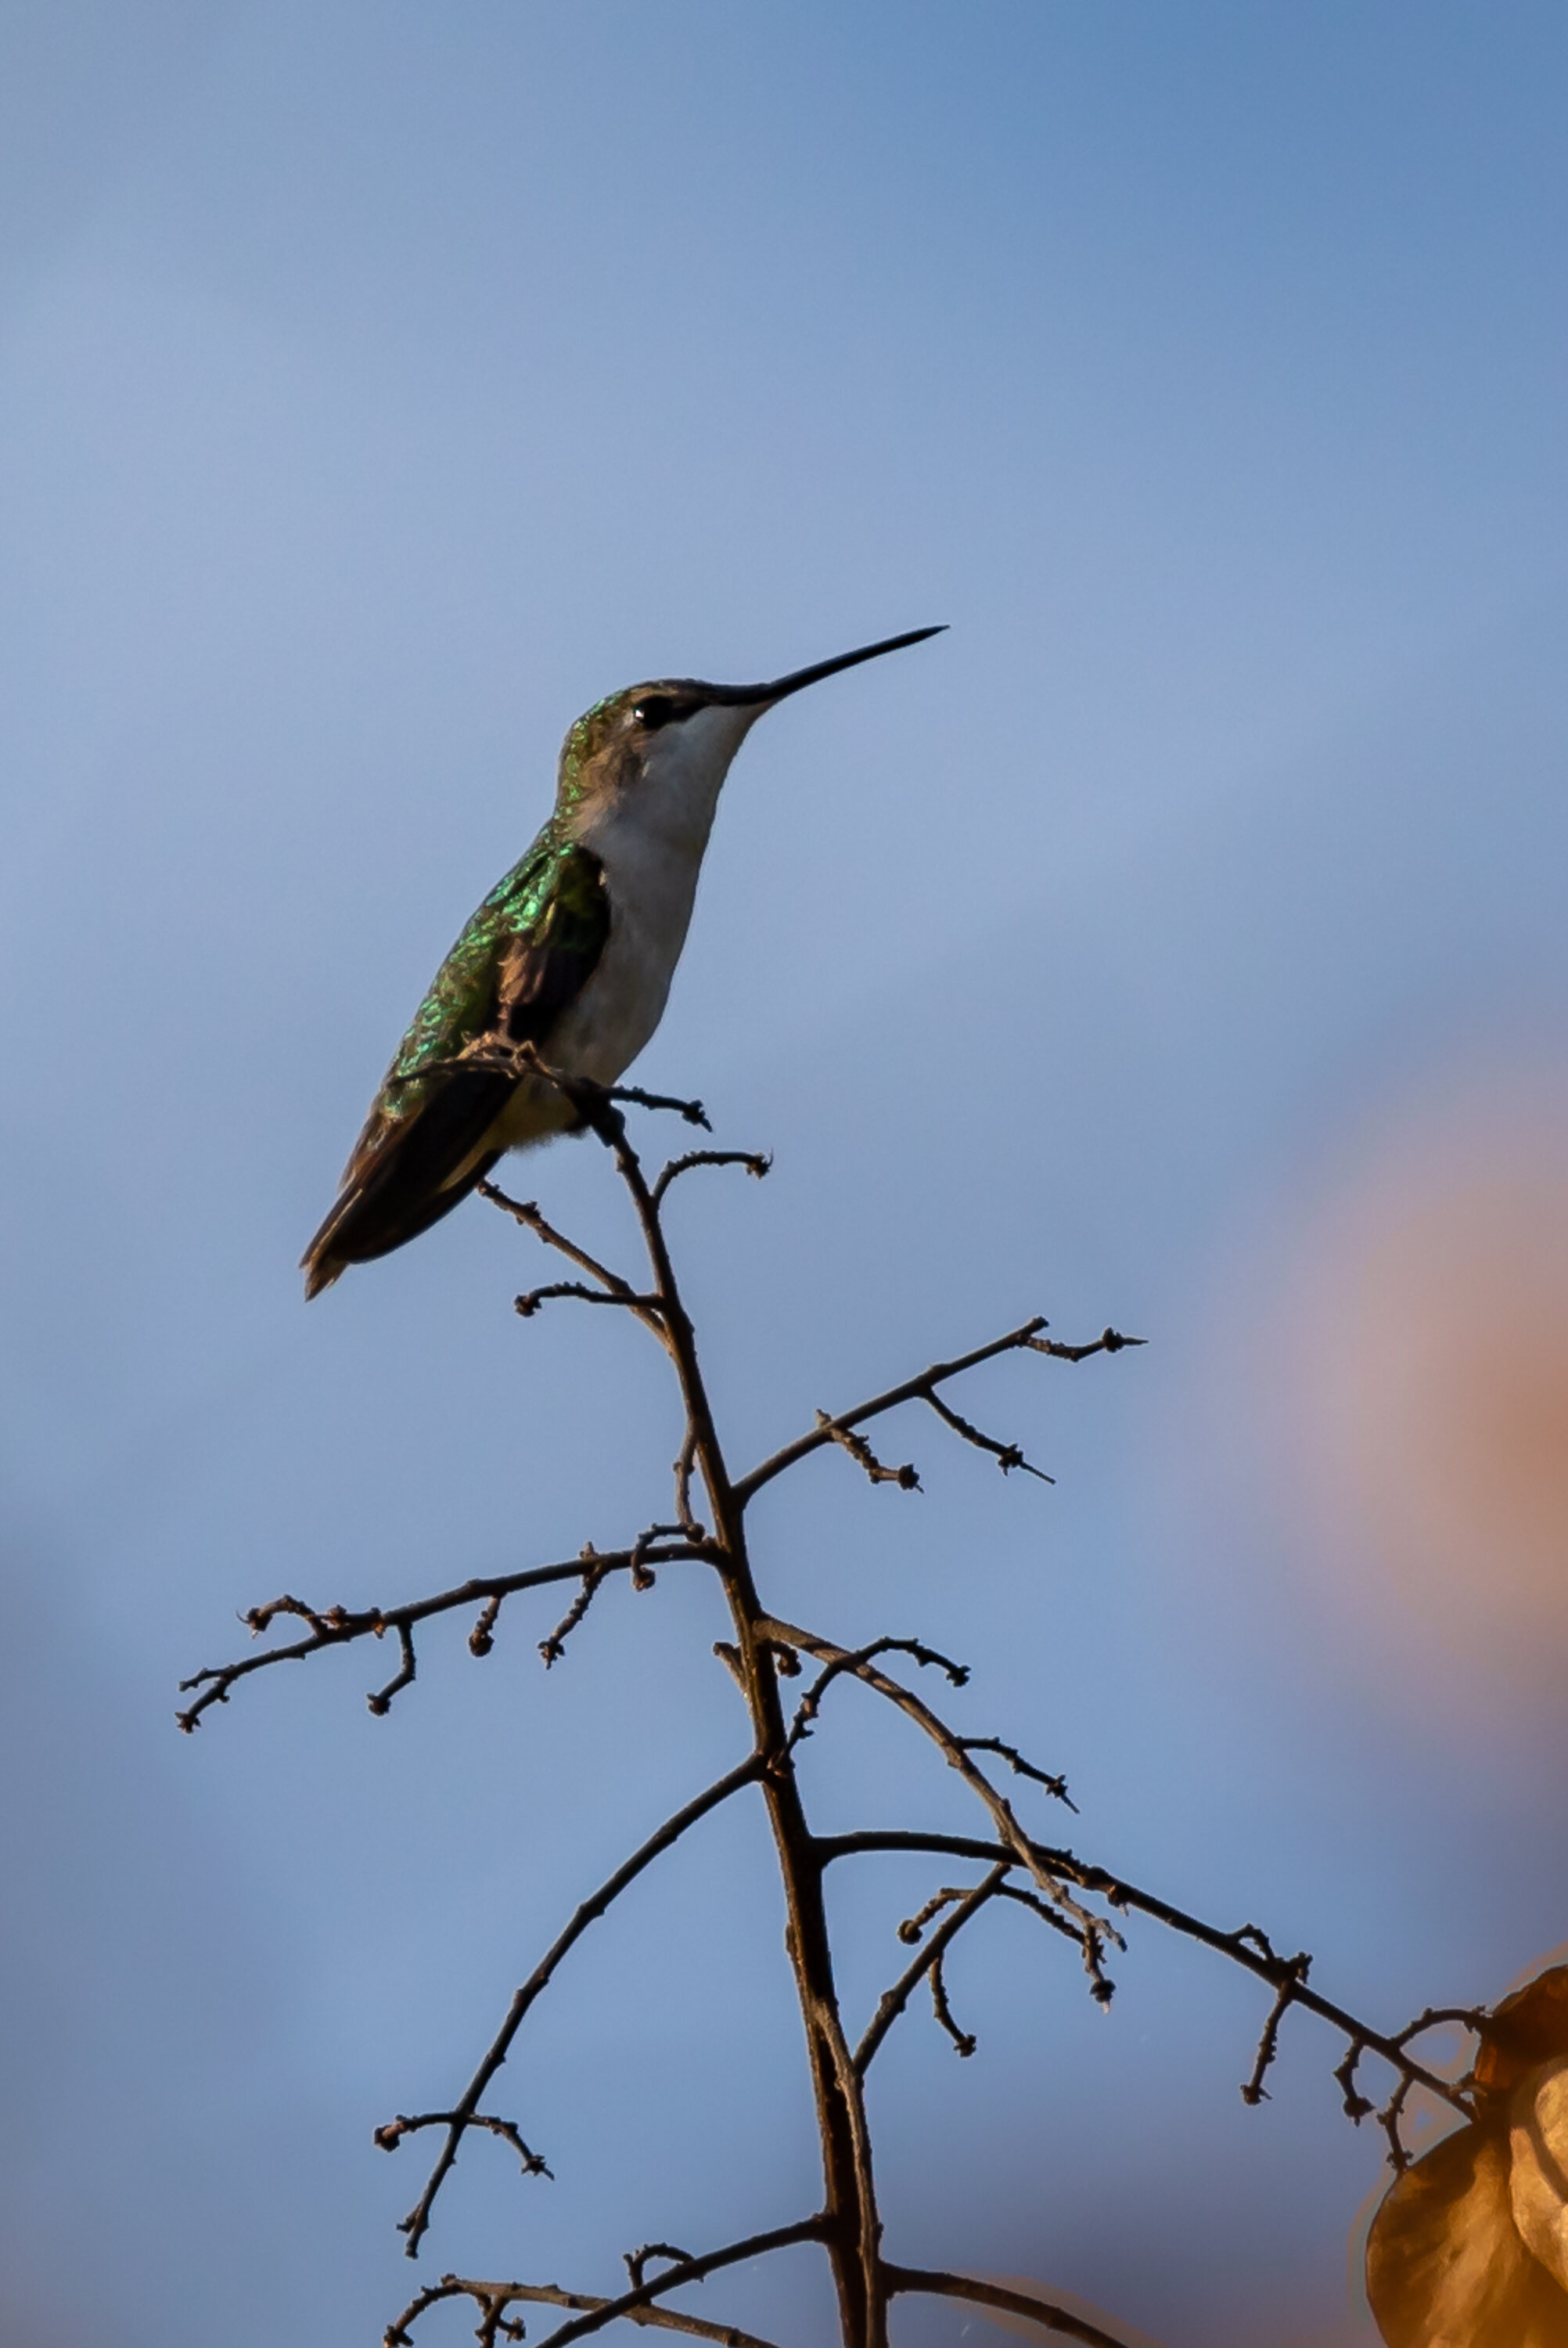 Female Ruby Throated Hummingbird, at rest.